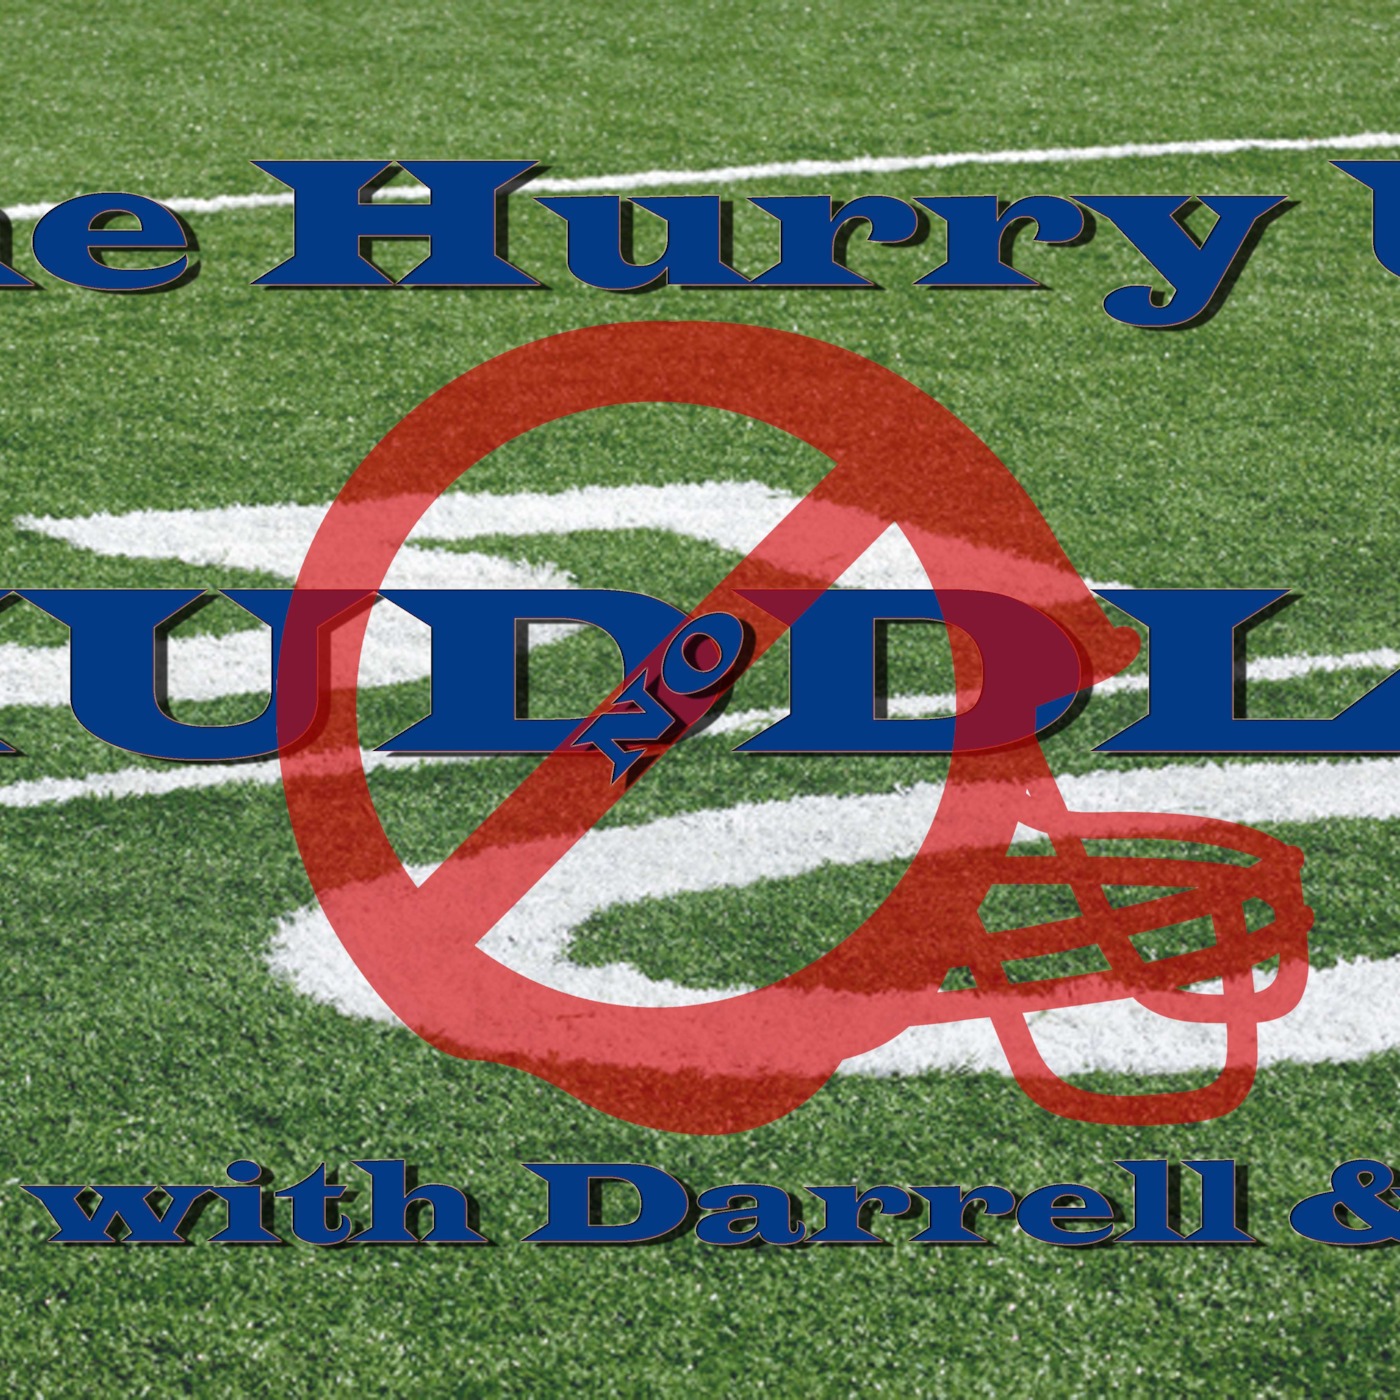 The Hurry Up No Huddle with Darrell, JC & Moone